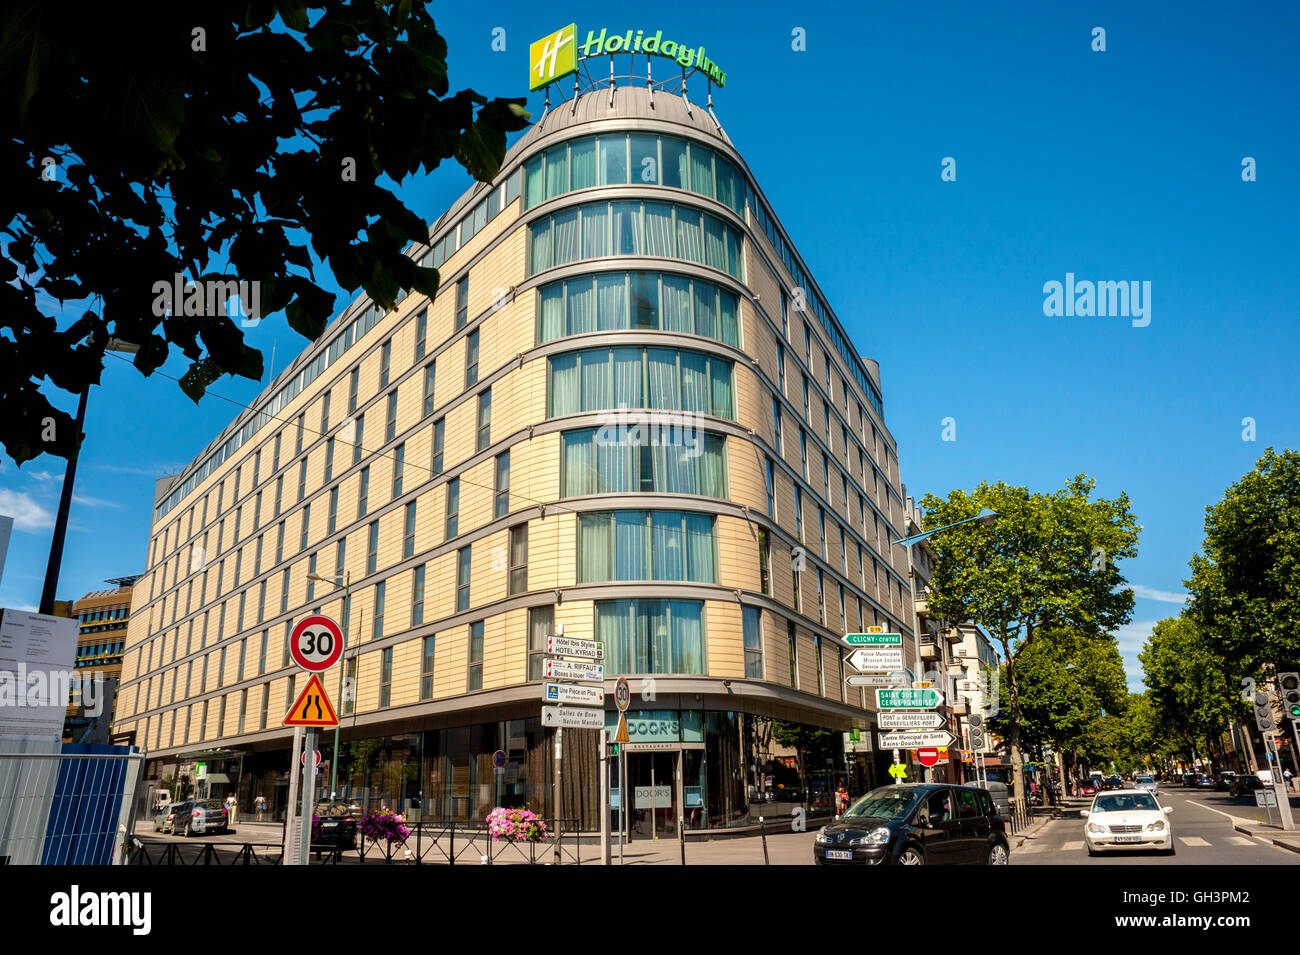 Clichy, France, Holiday Inn Hotel, Front Building, Porte de Clichy (Valode  & Pistre Architects Stock Photo - Alamy